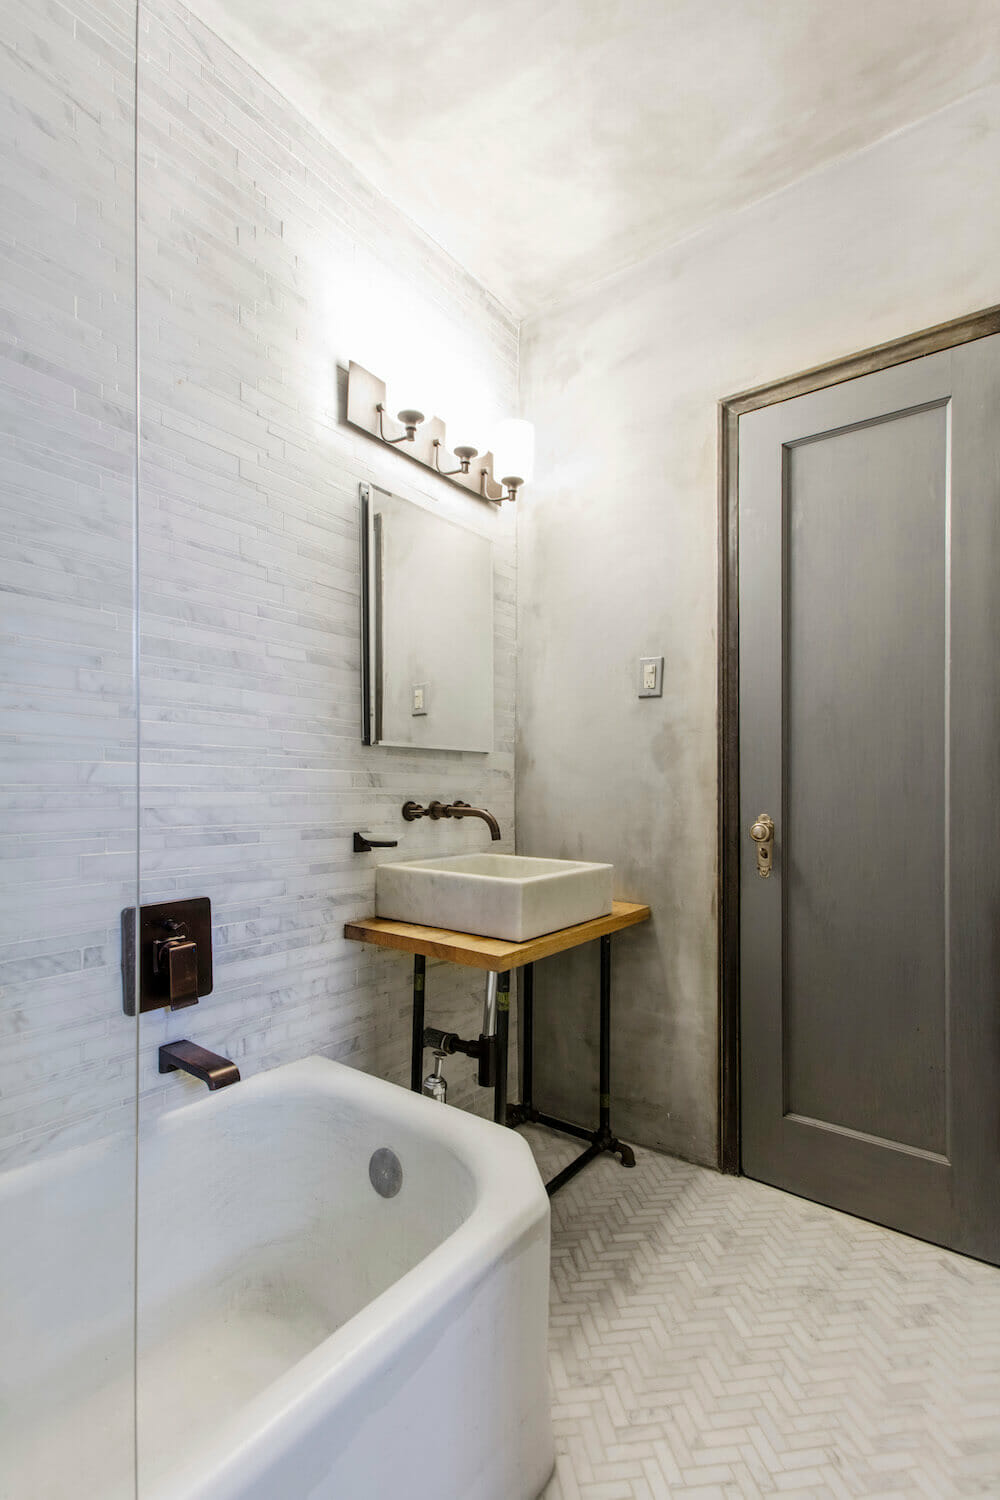 Gray door in a white bathroom with white bathtub and herringbone floor tile after renovation